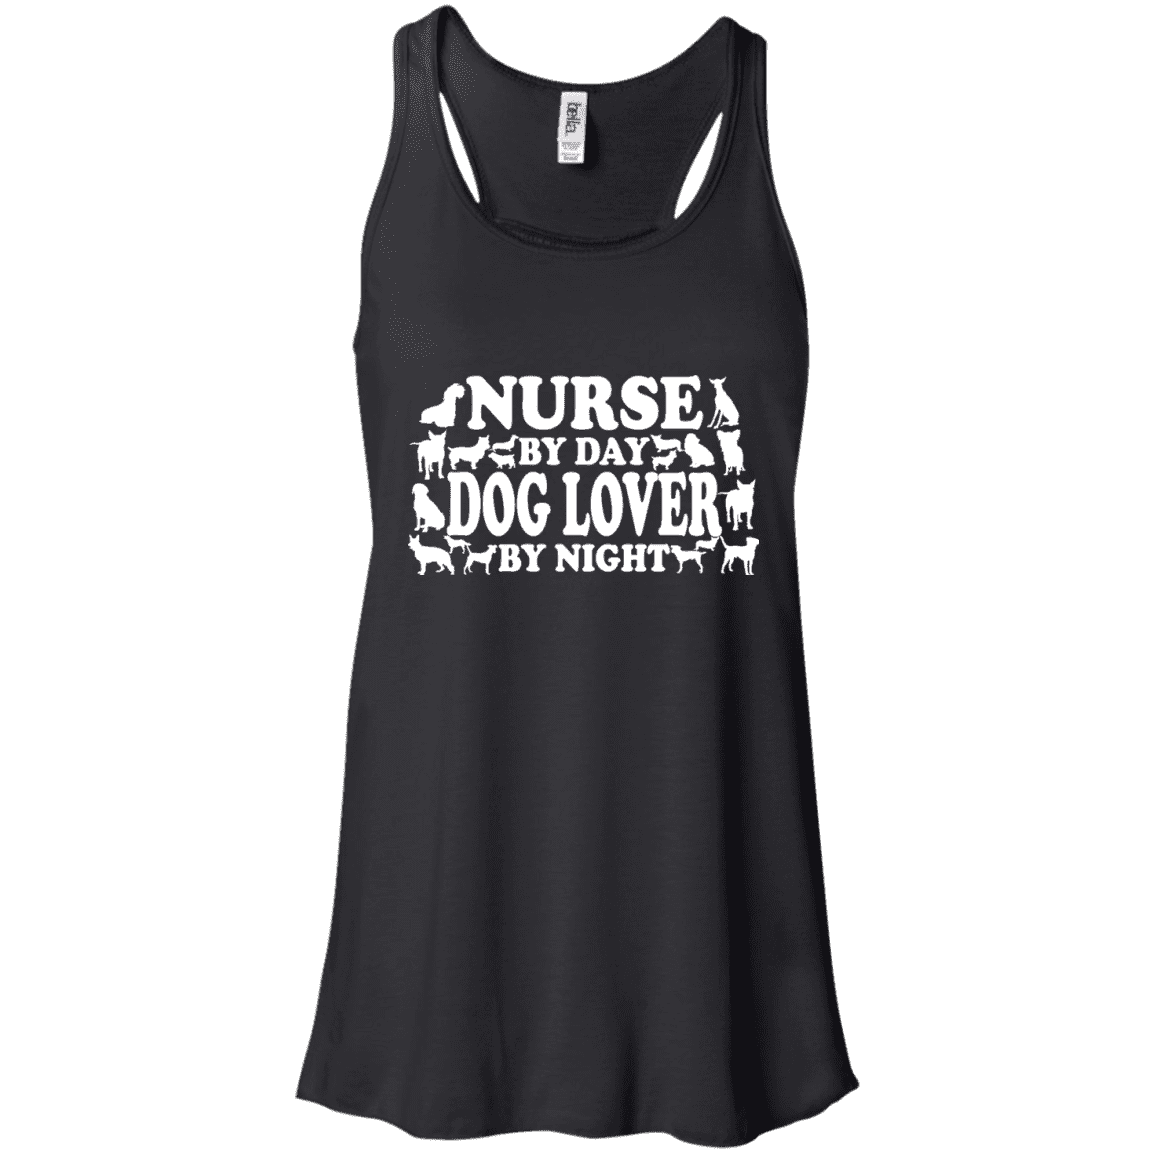 Nurse By Day Dog Lover By Night Ladies Tee - STUDIO 11 COUTURE